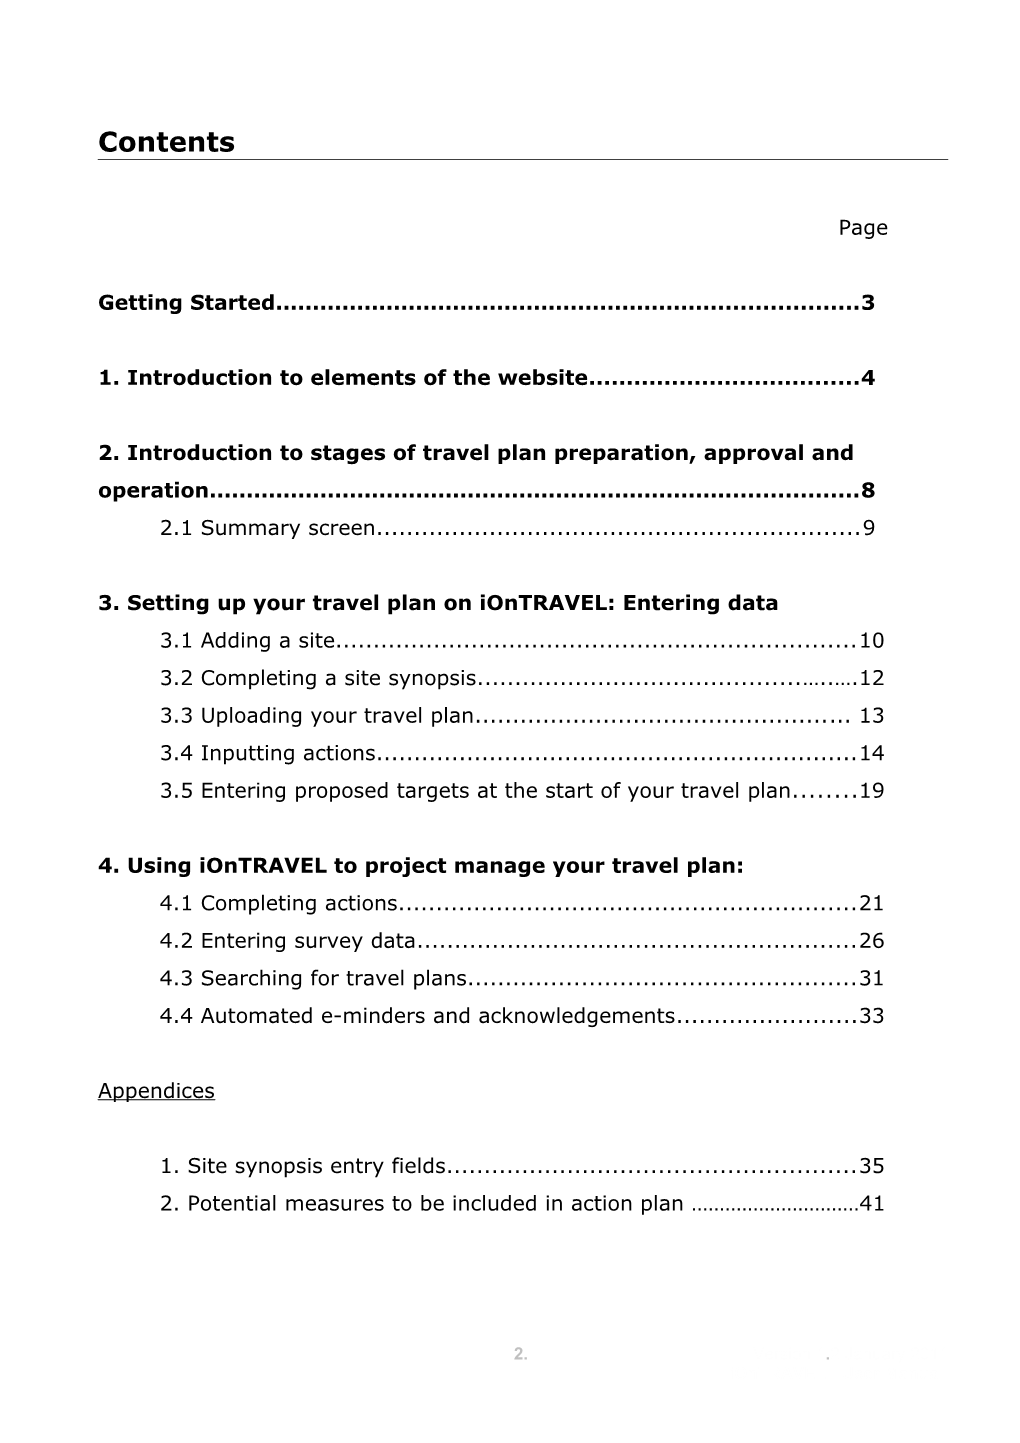 MANUAL for Iontravel